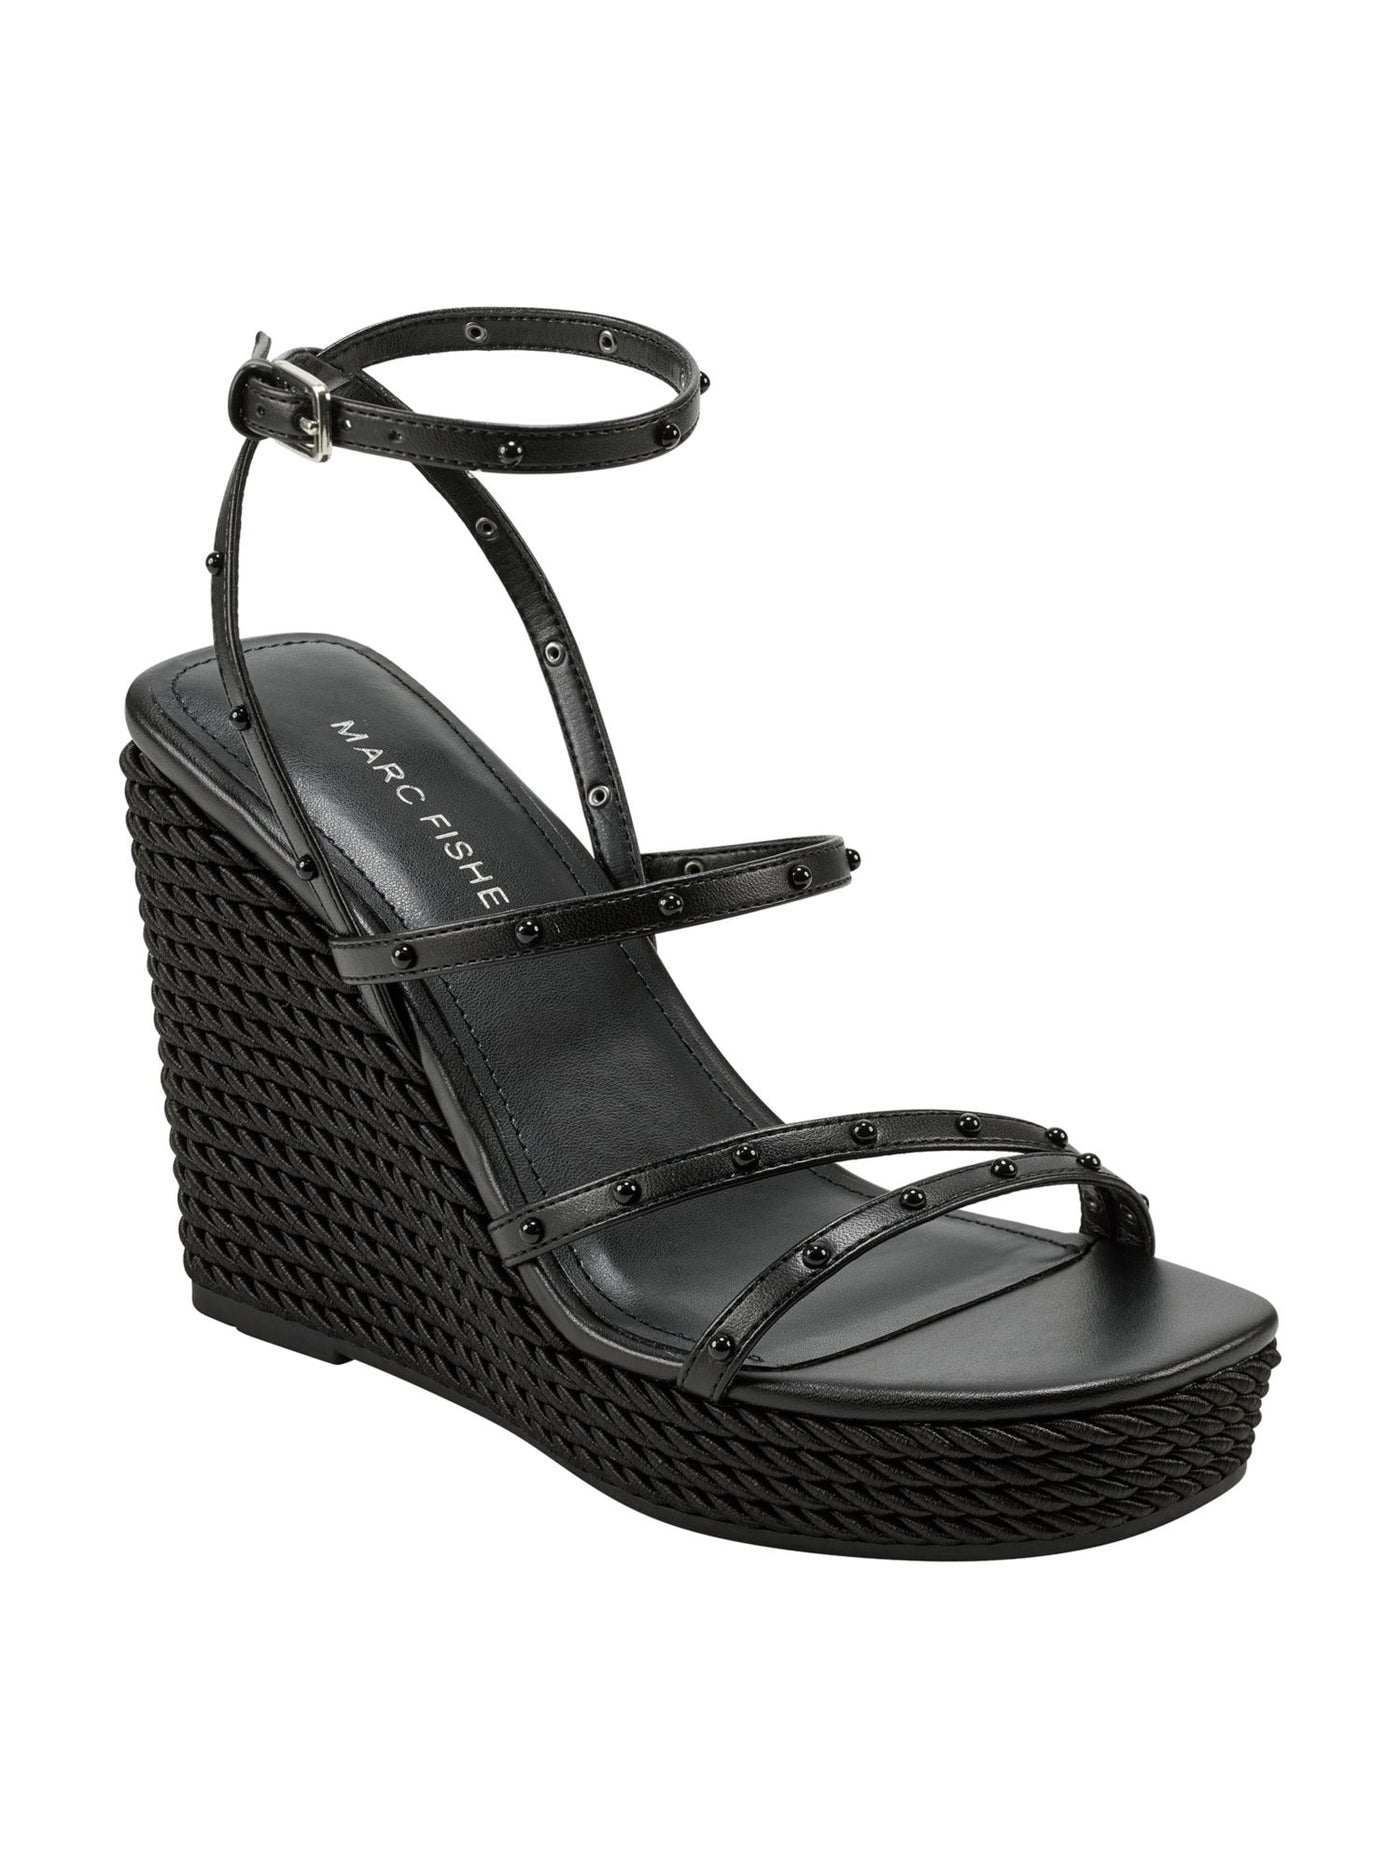 MARC FISHER Womens Black Strappy Studded Zig Square Toe Wedge Buckle Heeled Sandal 9 M